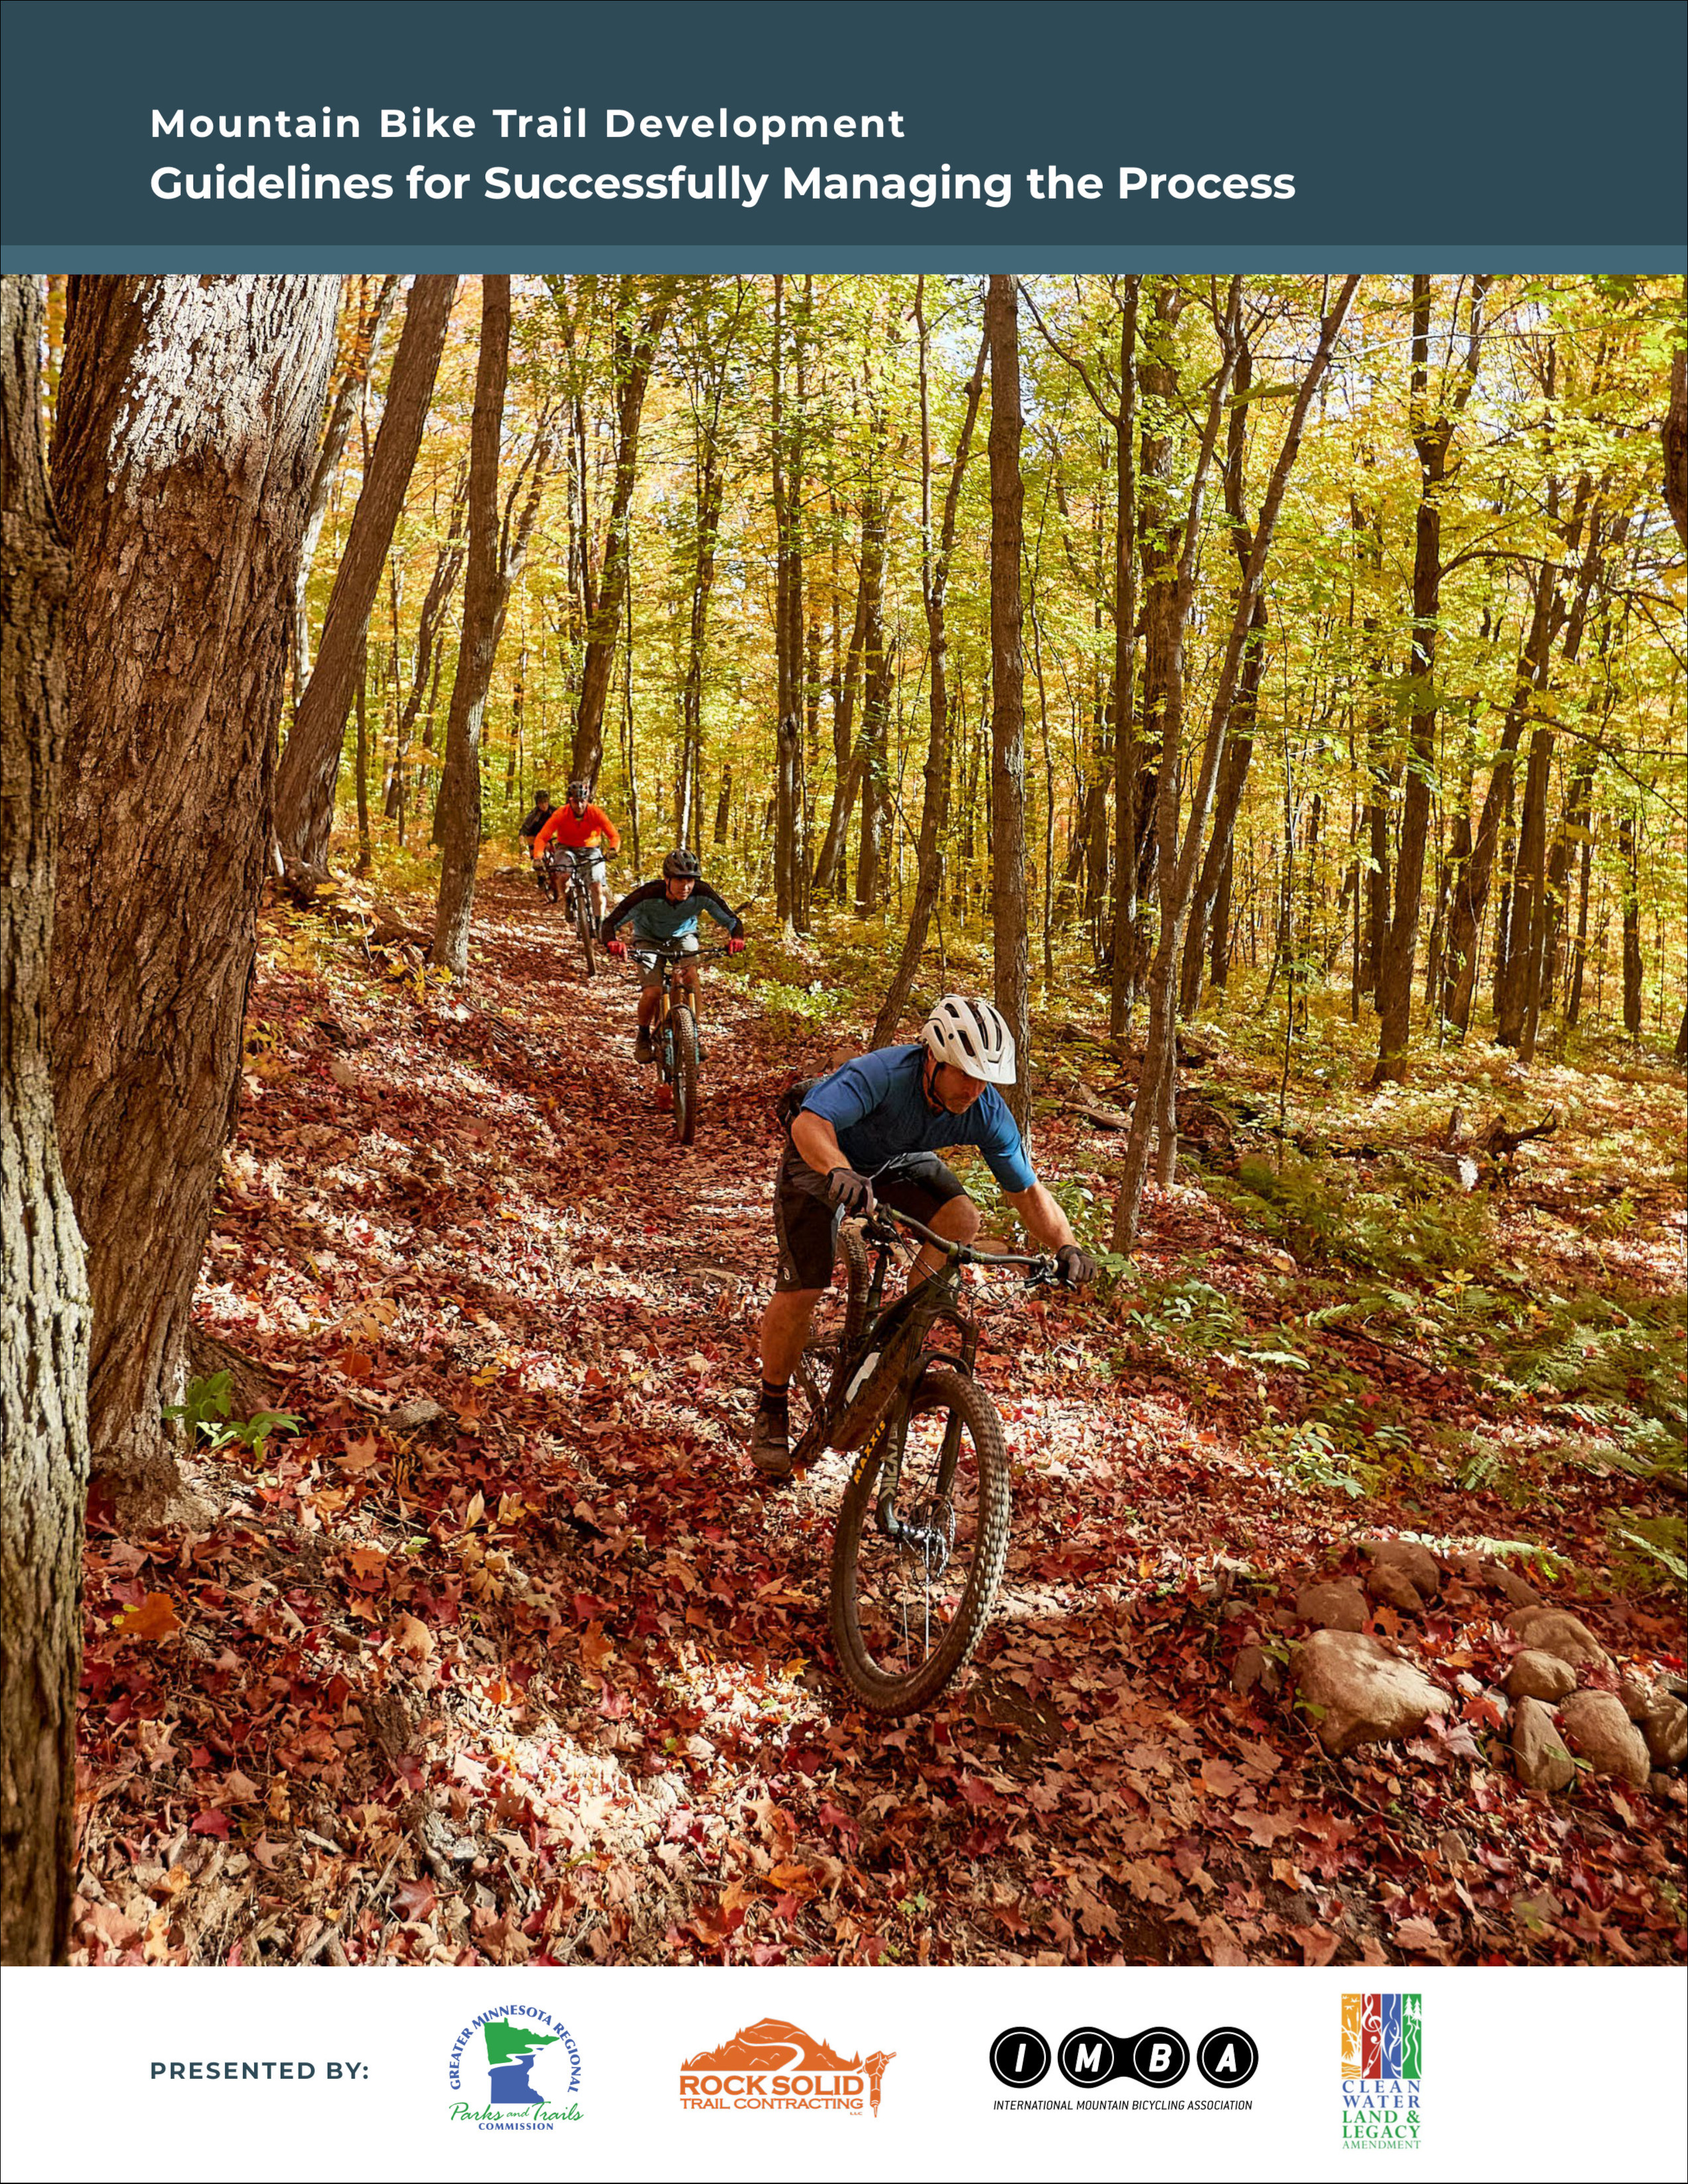 A book cover featuring a photo of mountain bikers riding downhill on a leaf covered trail among trees with green and yellow leaves